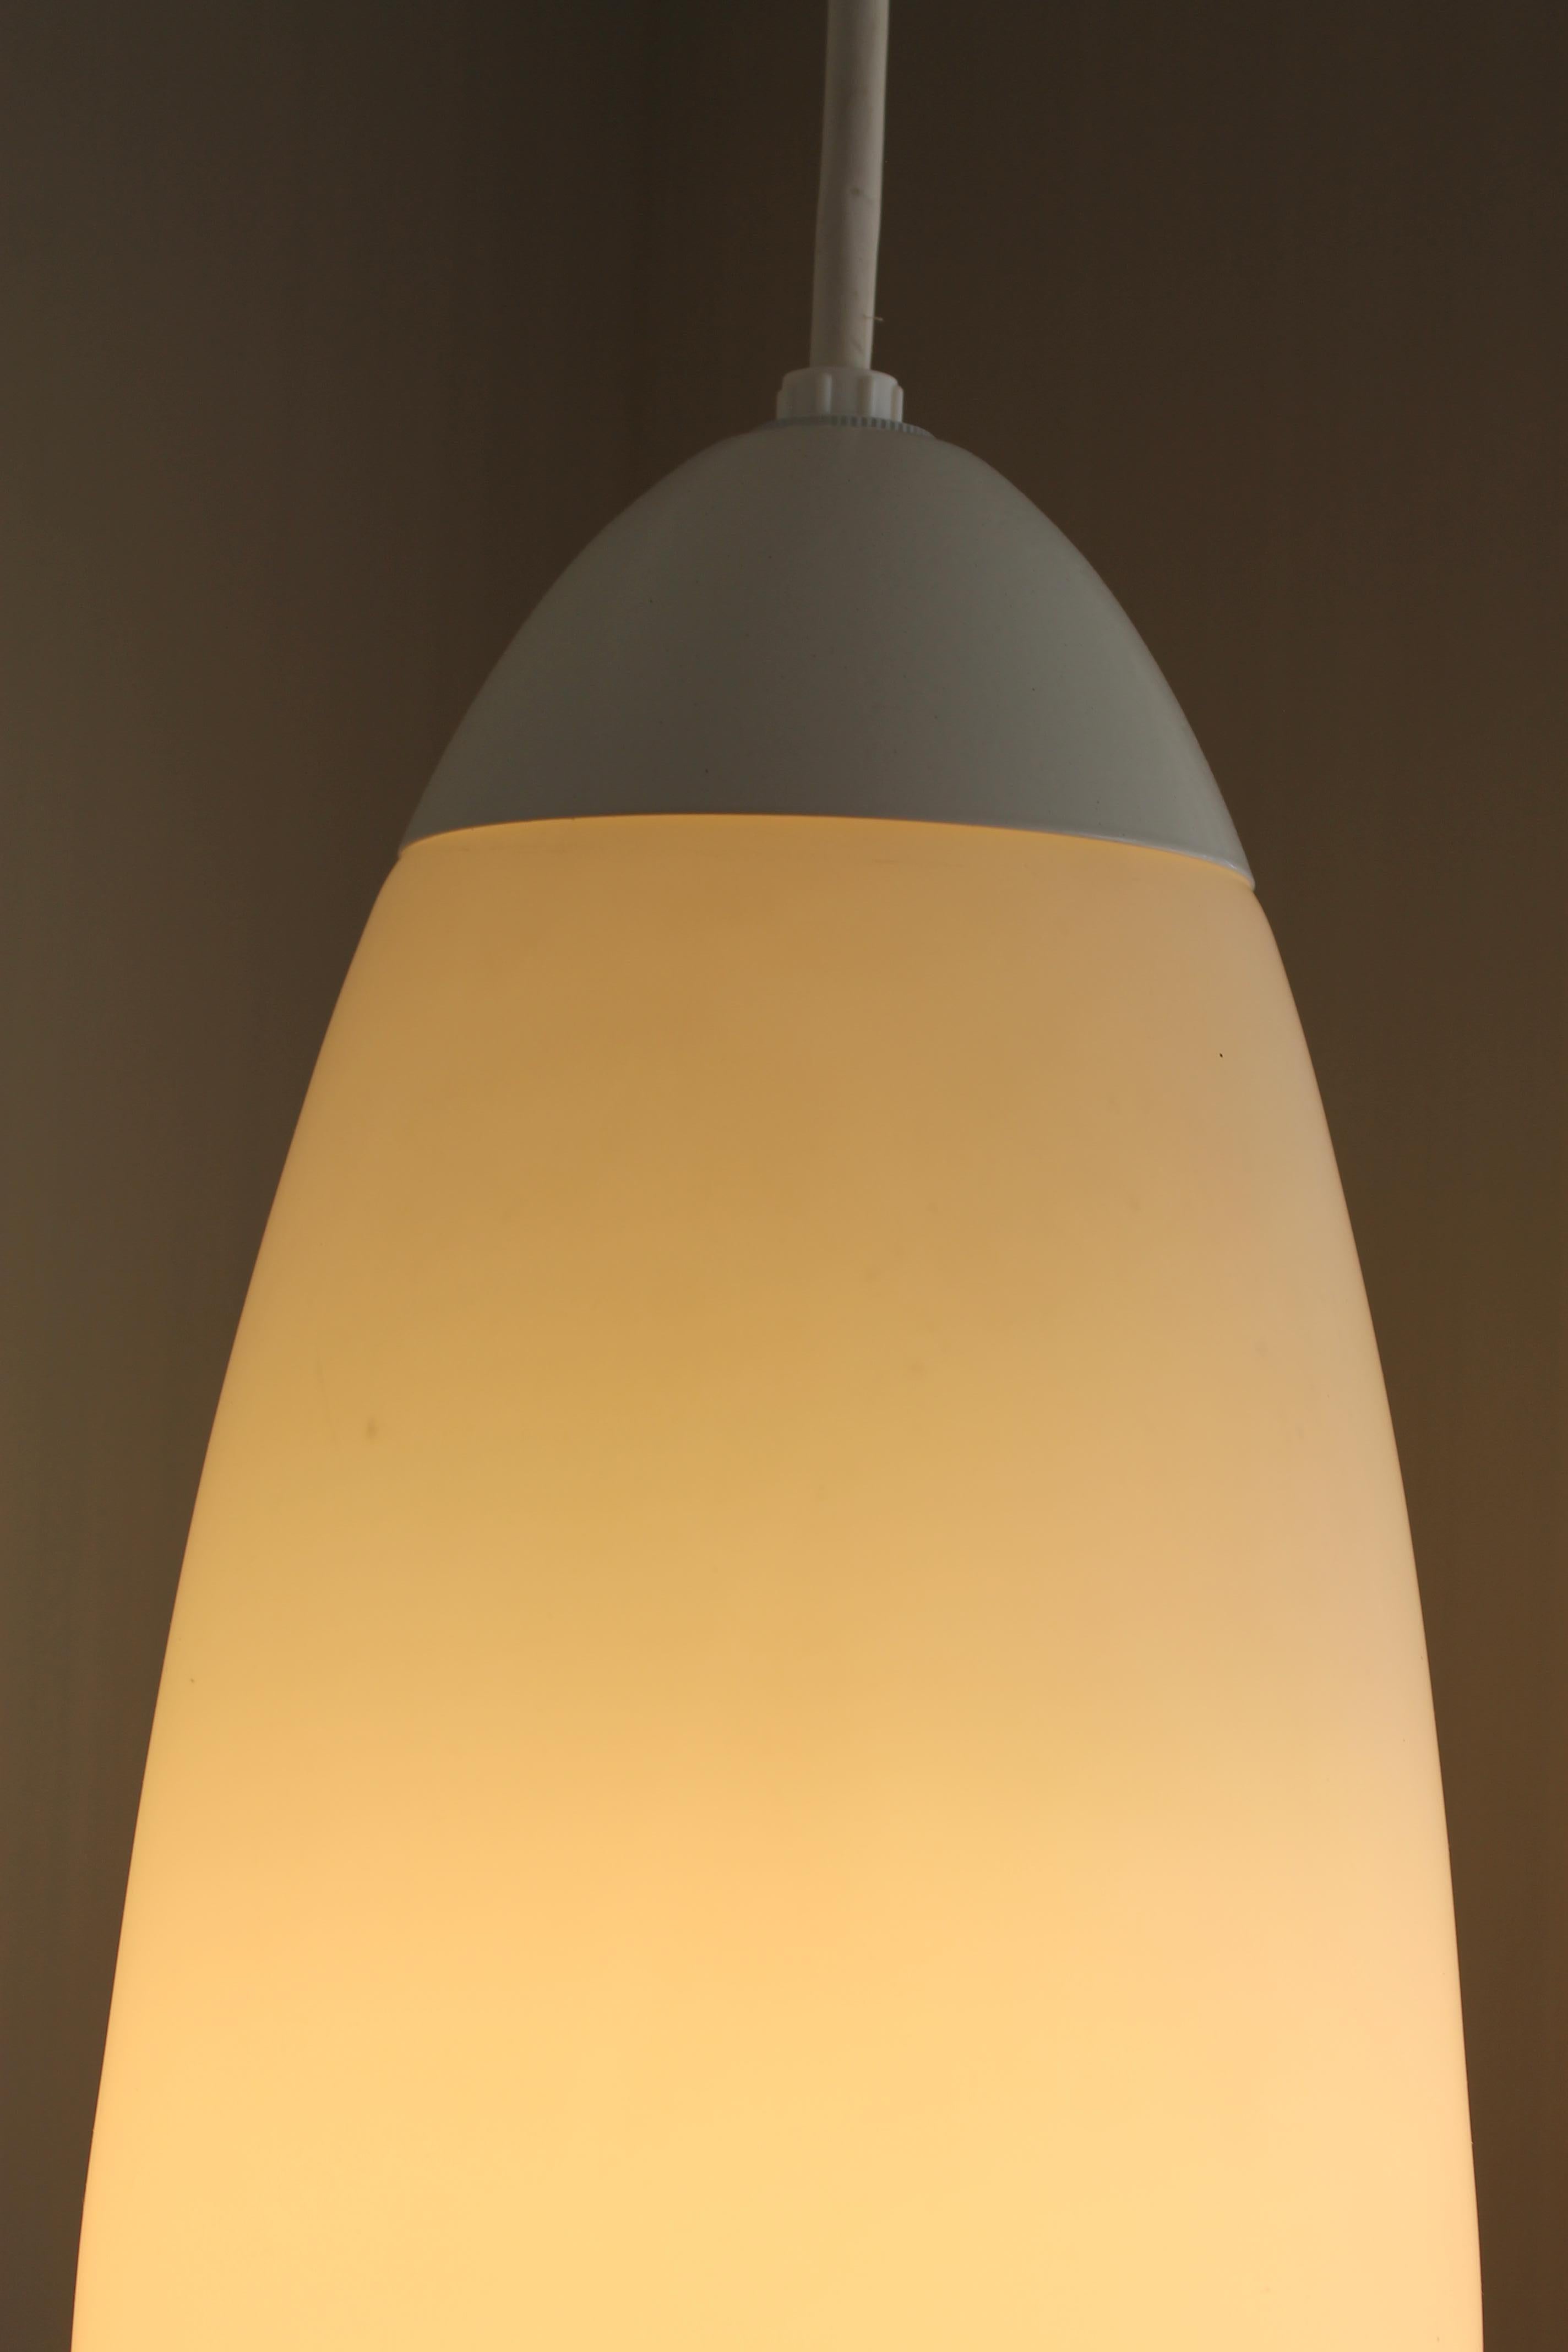 Elongated Mid-Century Modern Hanging Pendant Lamp In Good Condition For Sale In Palm Springs, CA